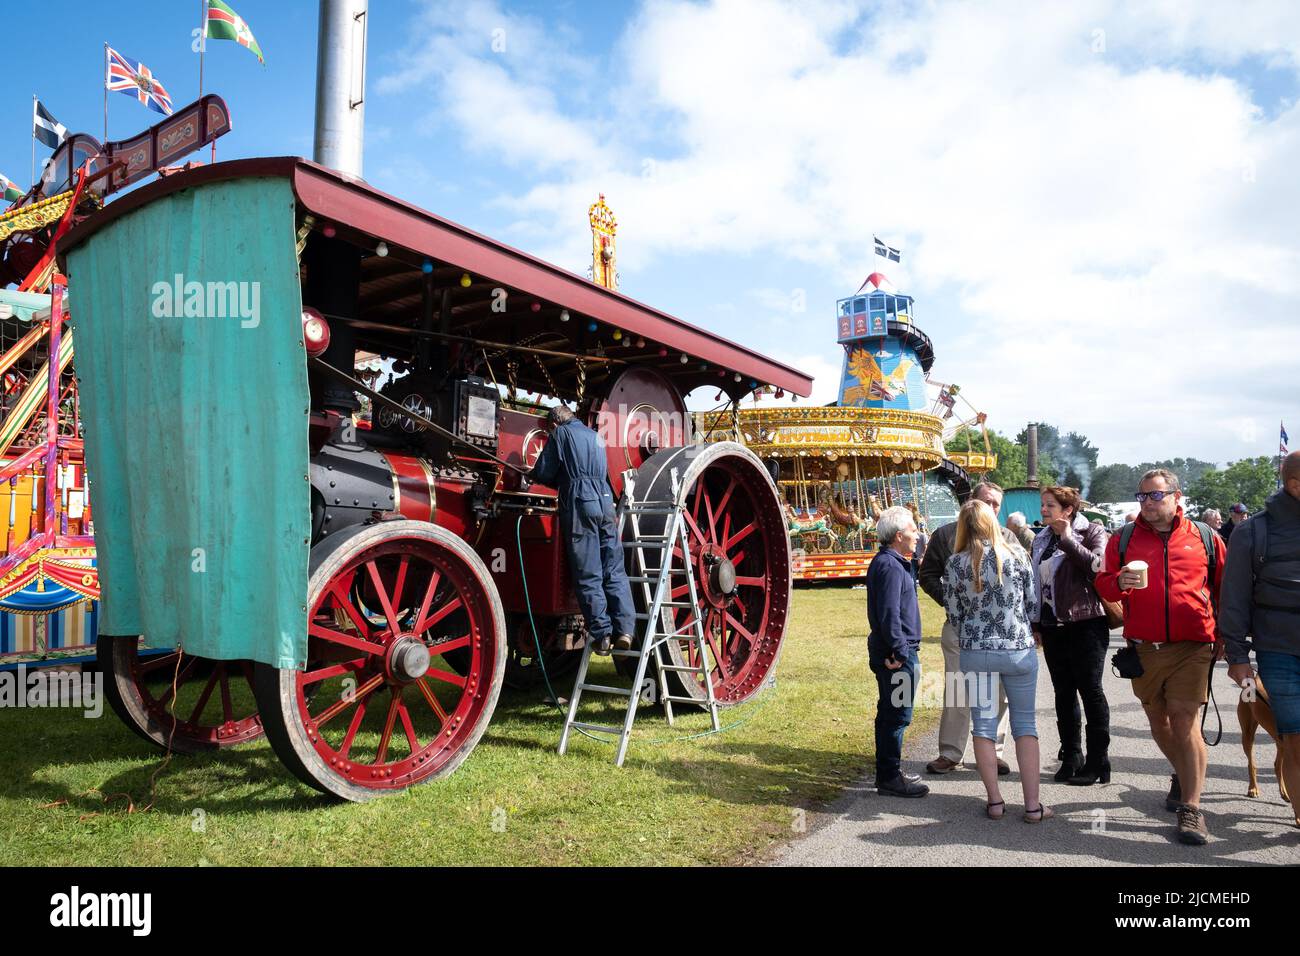 Dedicated owner at work on his traction engine. Lovingly restored and maintained. Great for being part of a community of owners and admirers. Stock Photo